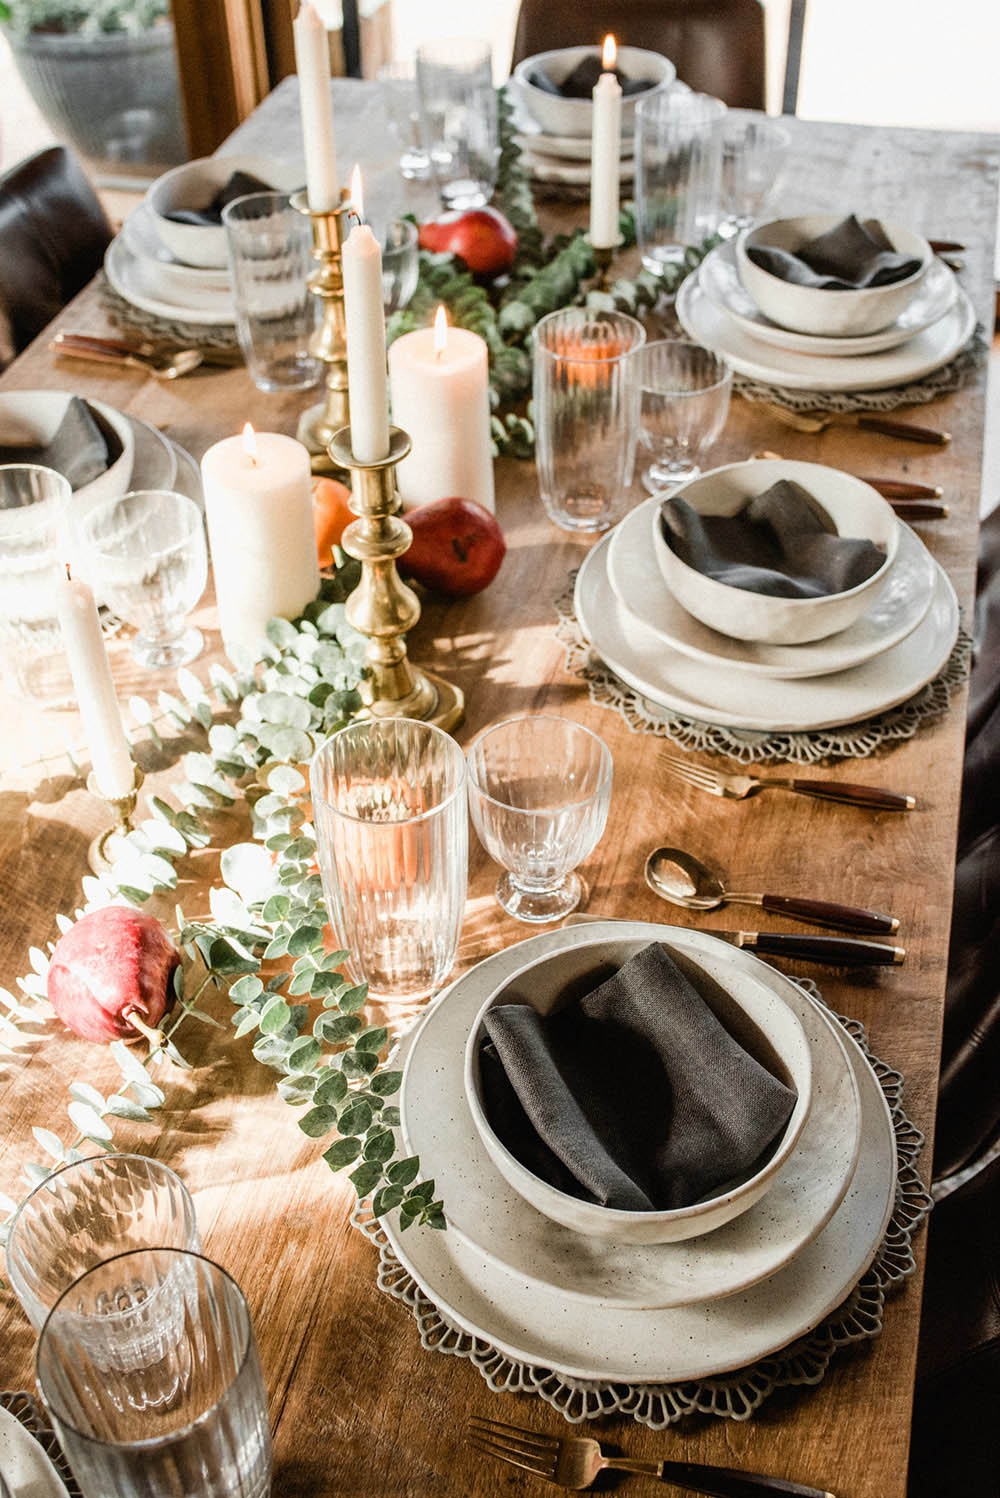 A wooden table with white place settings on decorative chargers.